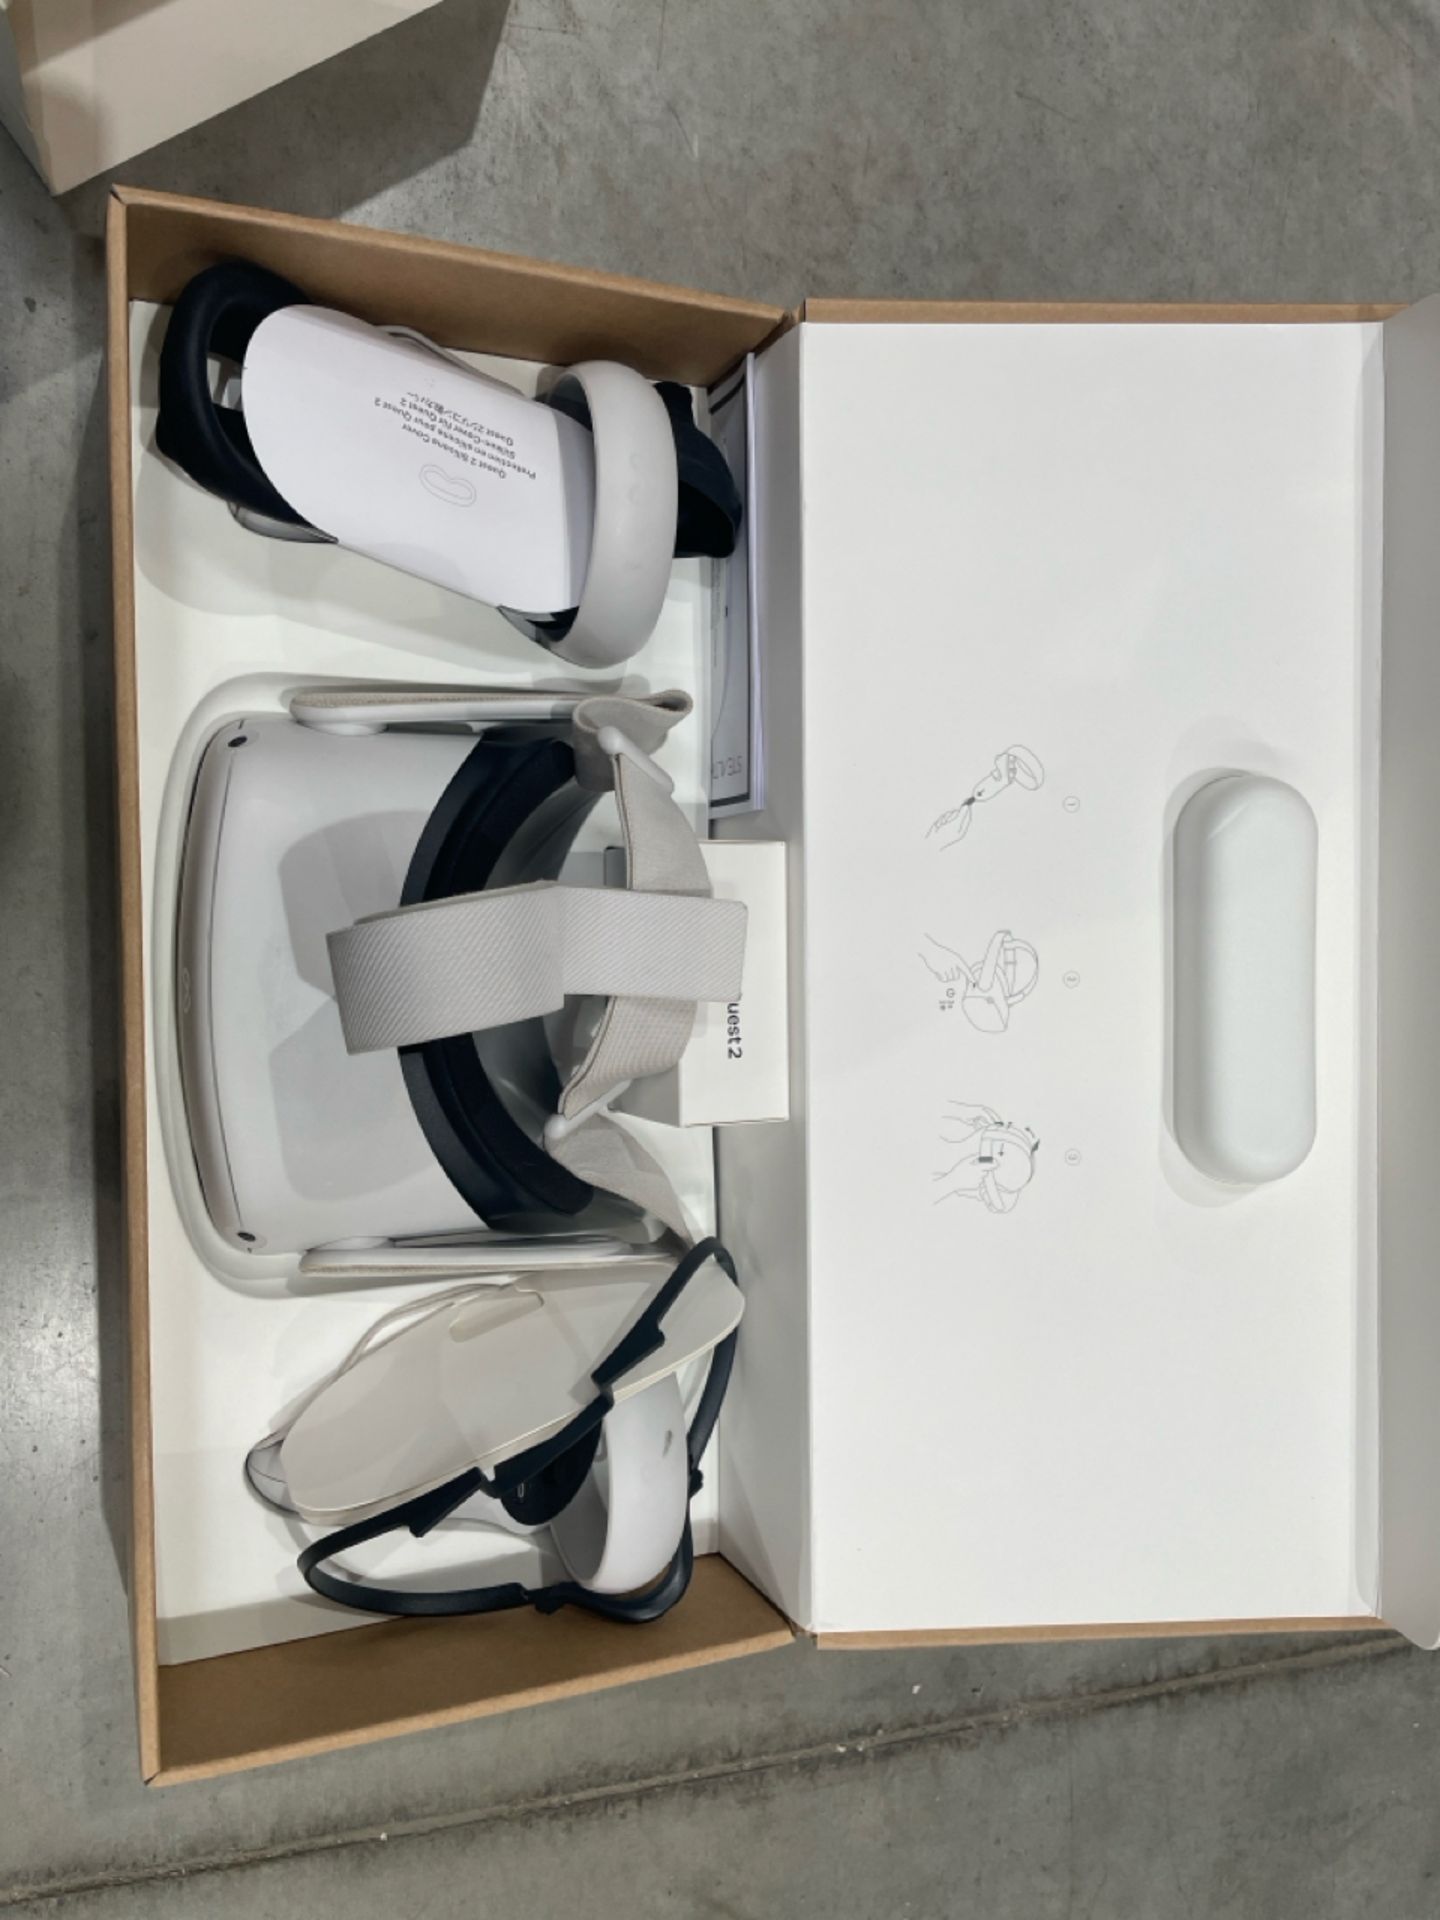 Meta Quest 2VR Headset 128 GB - Image 2 of 2